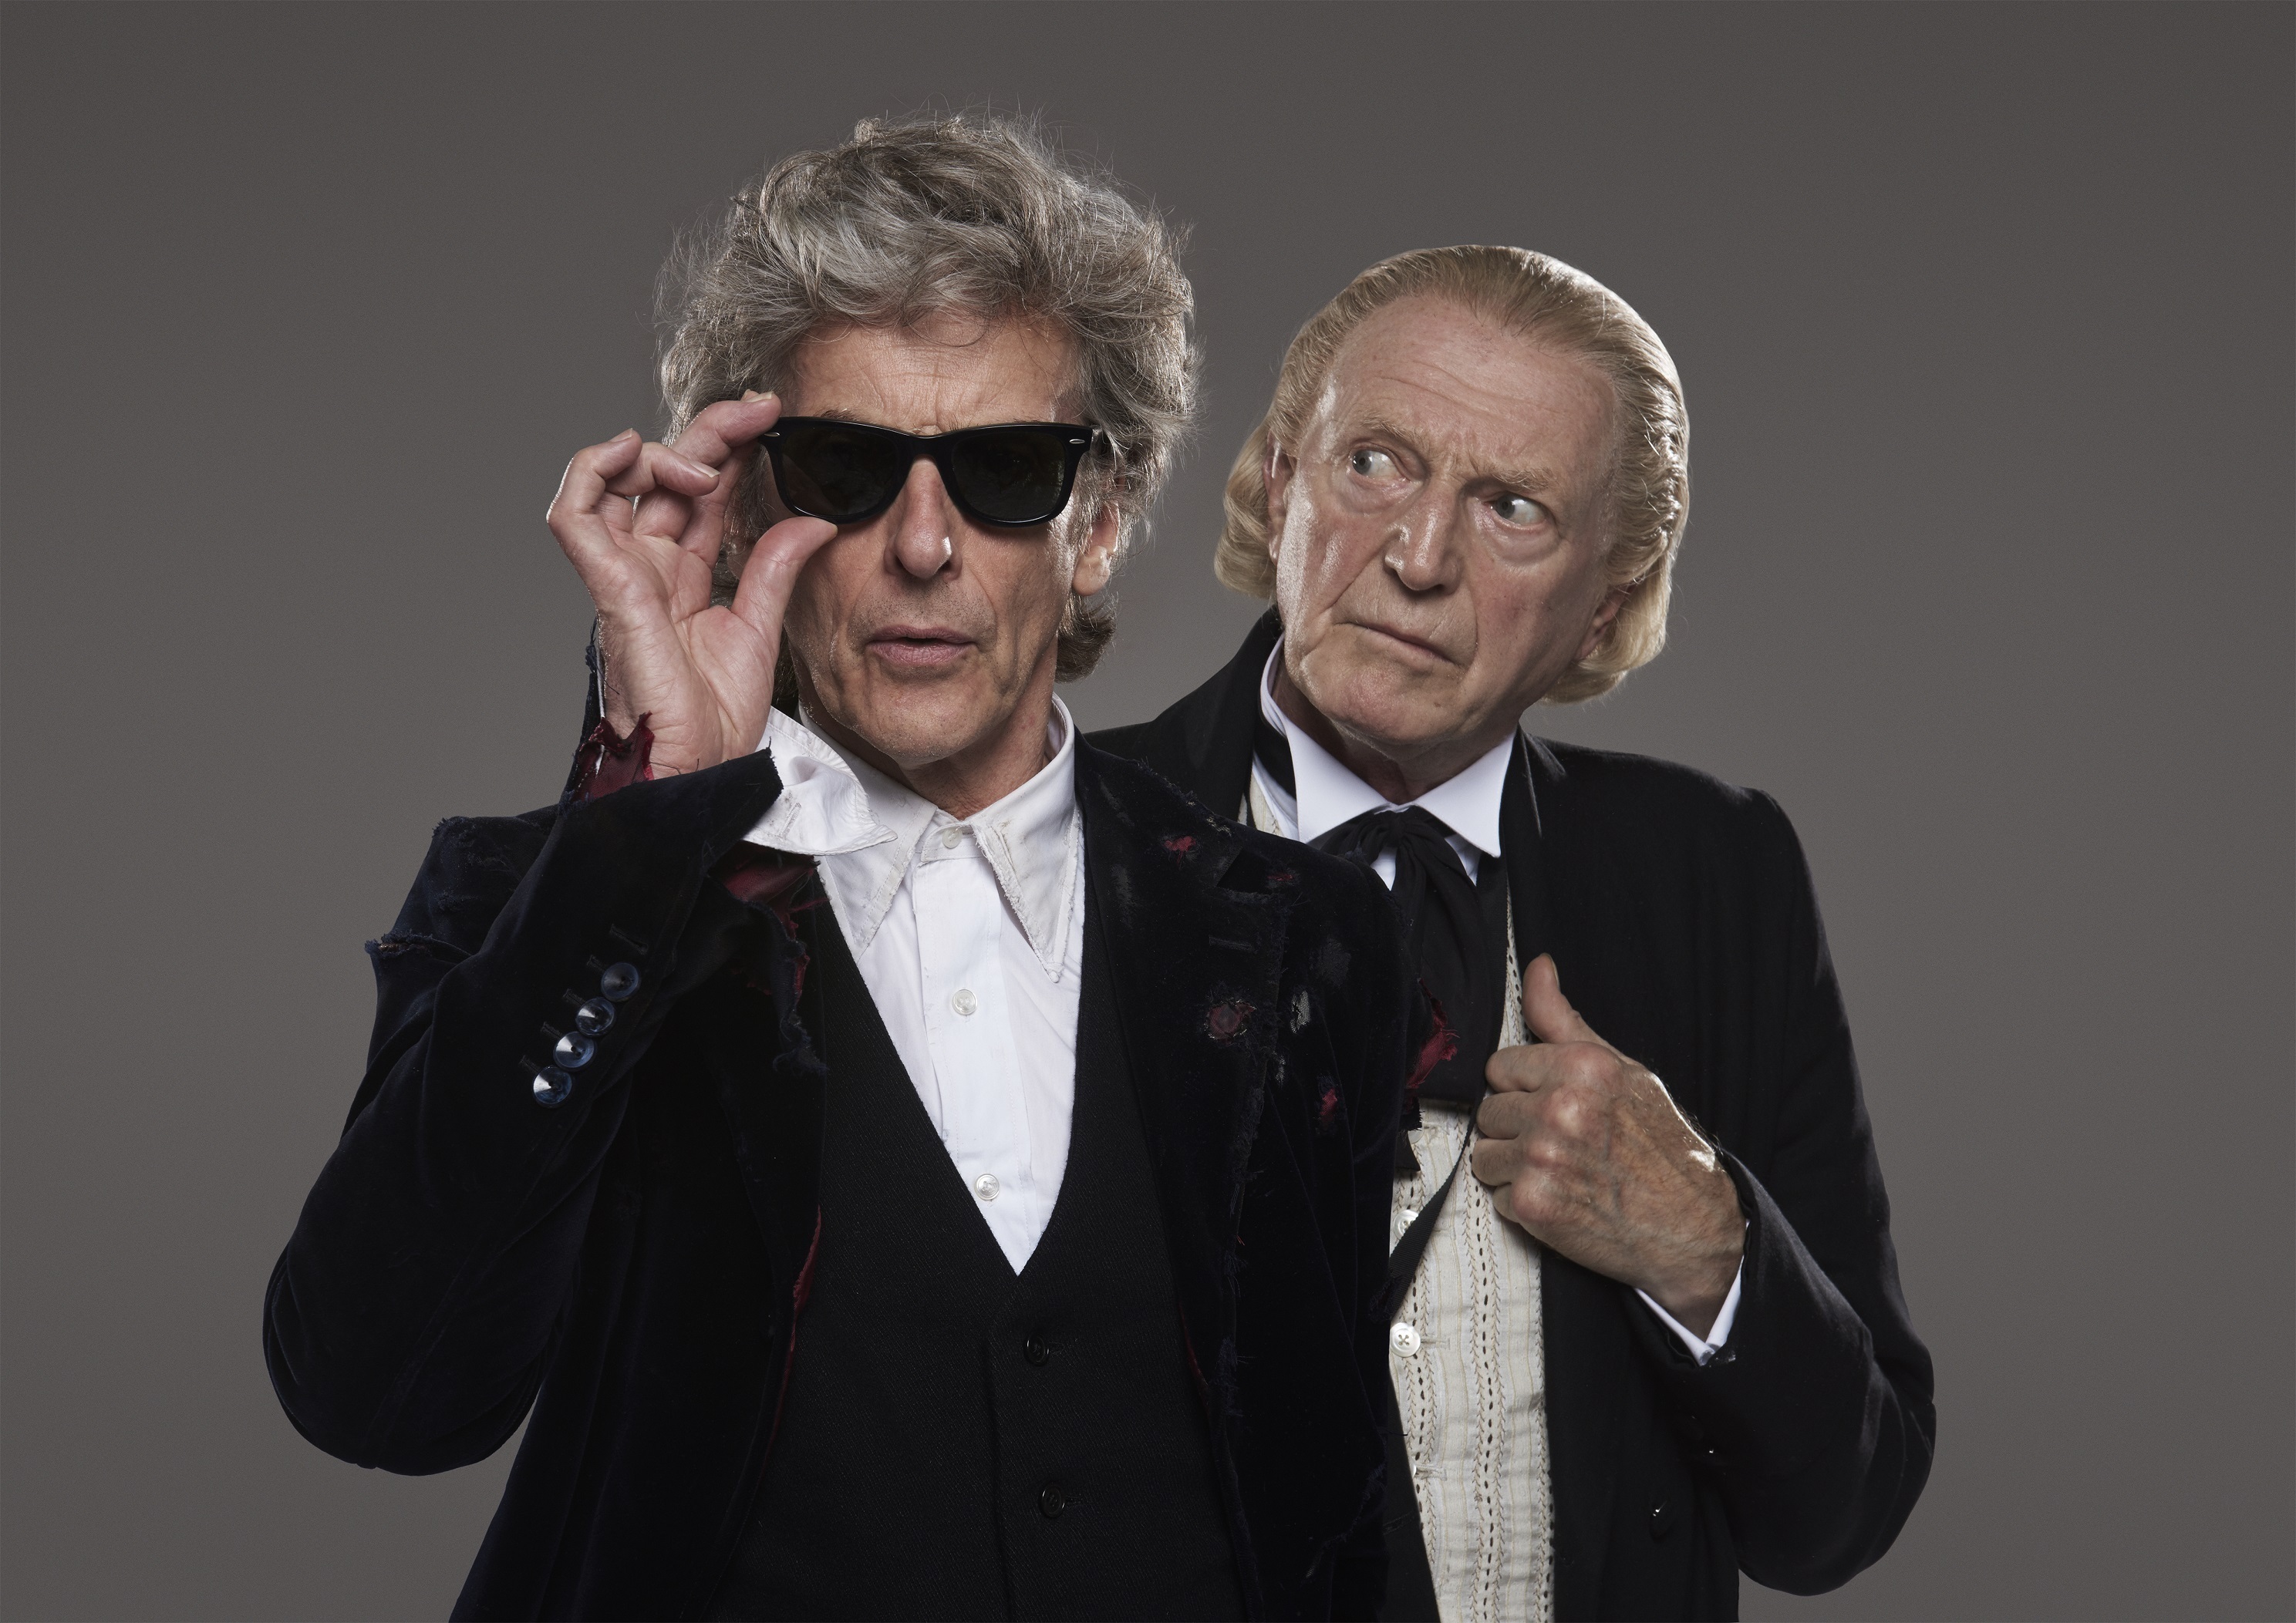 David Bradley takes on the role of the First Doctor in this year's Christmas special with Peter Capaldi
(BBC/PA Wire)